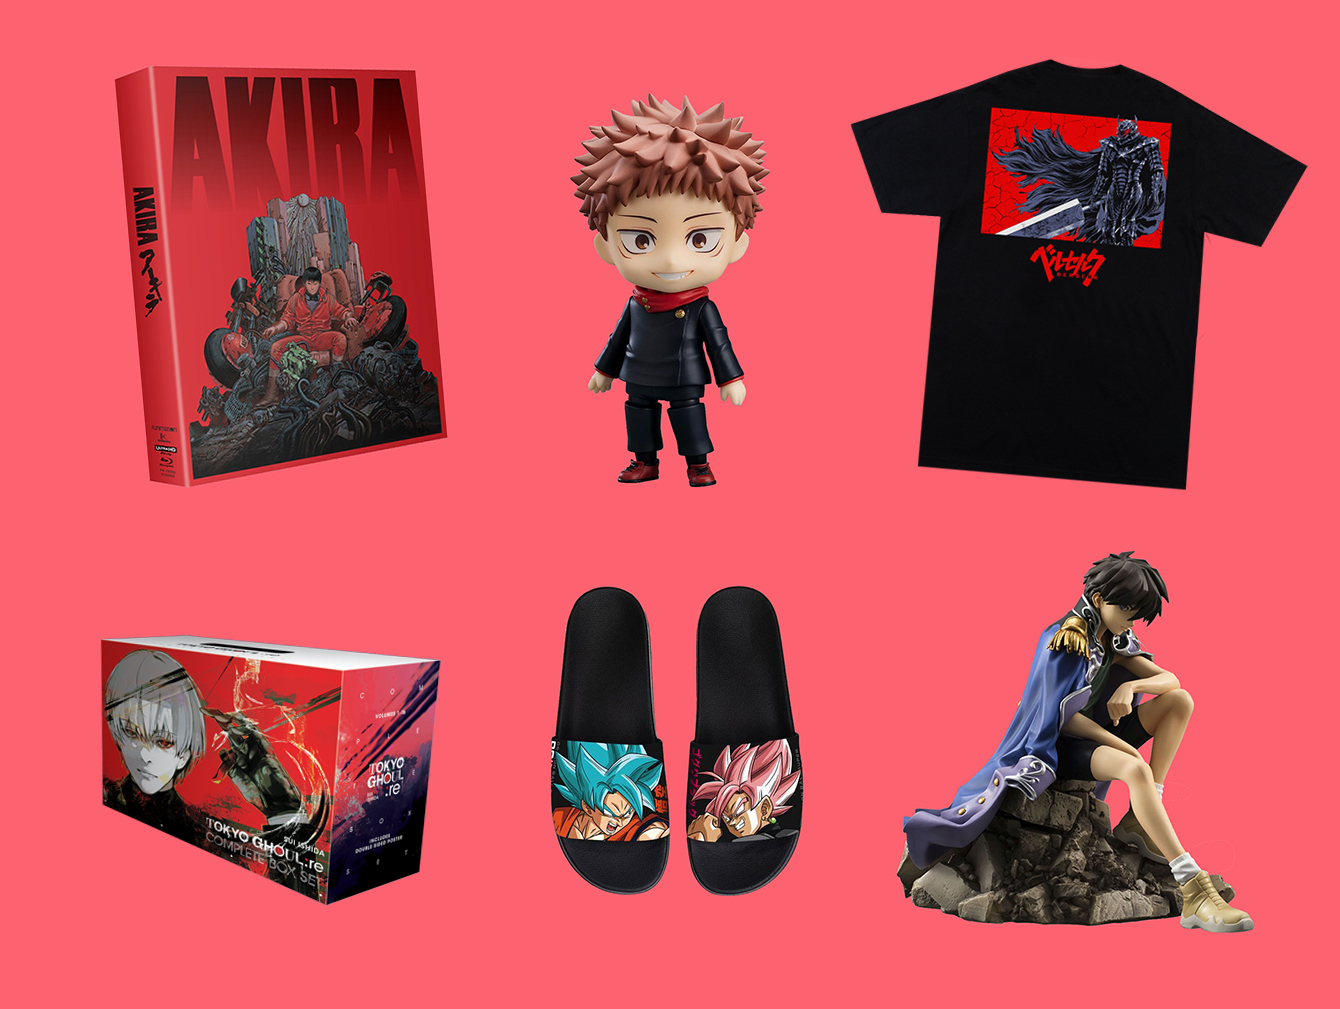 Gifts for Anime Lovers